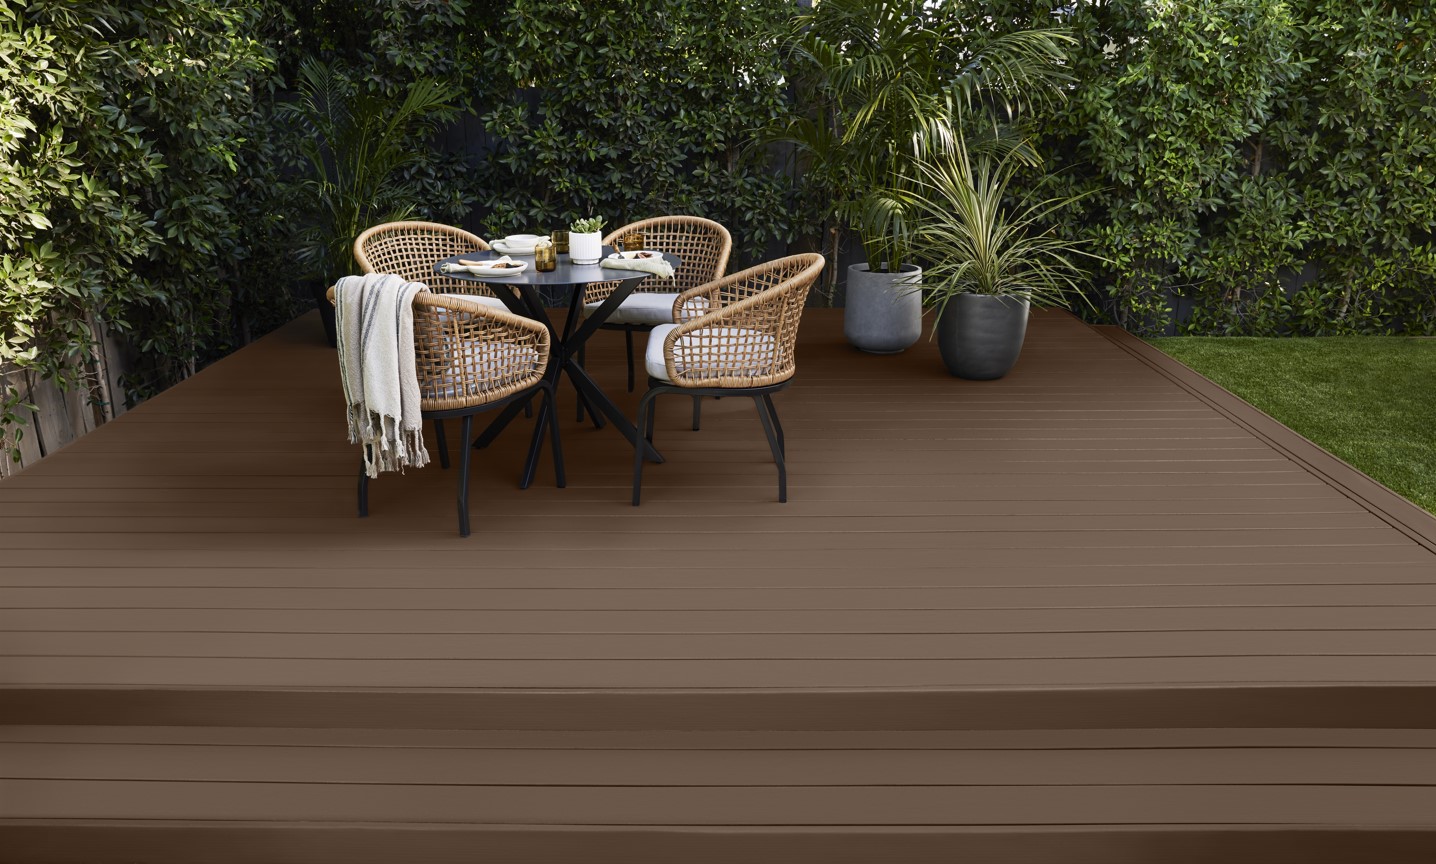 A brown solid colour wood deck with an outdoor table and chairs set